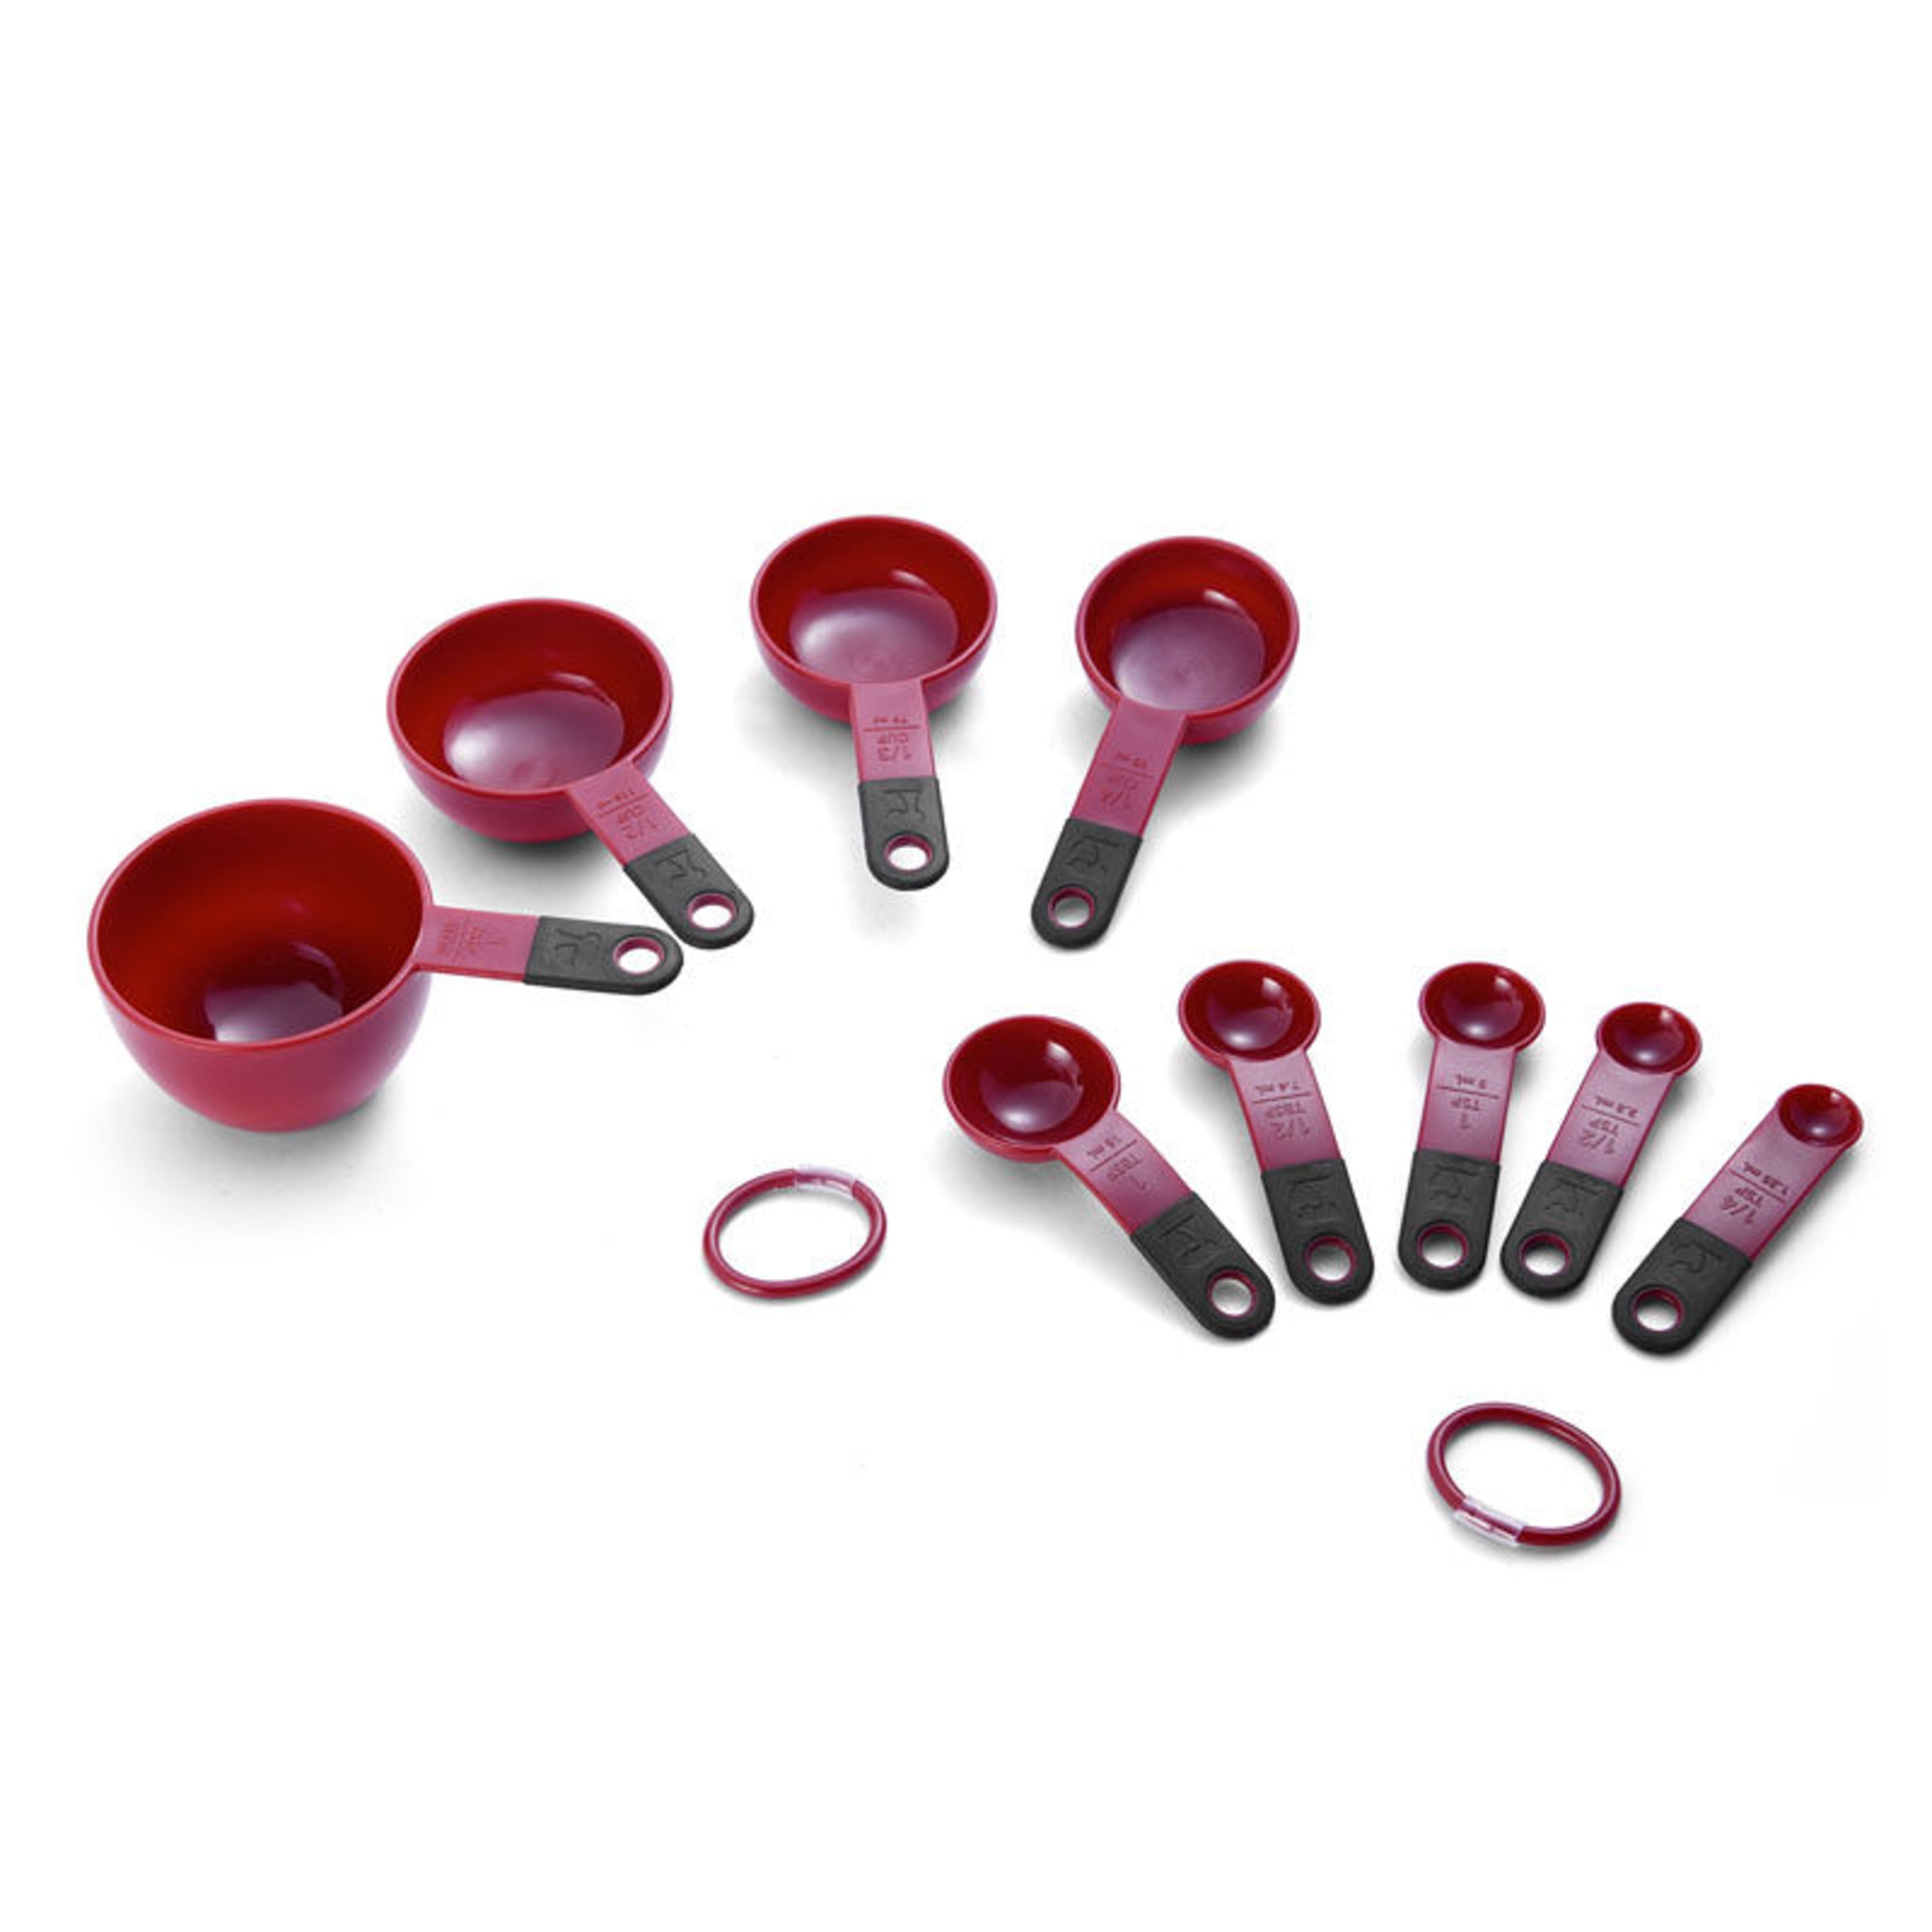 Kitchenaid 9-piece BPA-Free Plastic Measuring Cups and Spoons Set in Red 